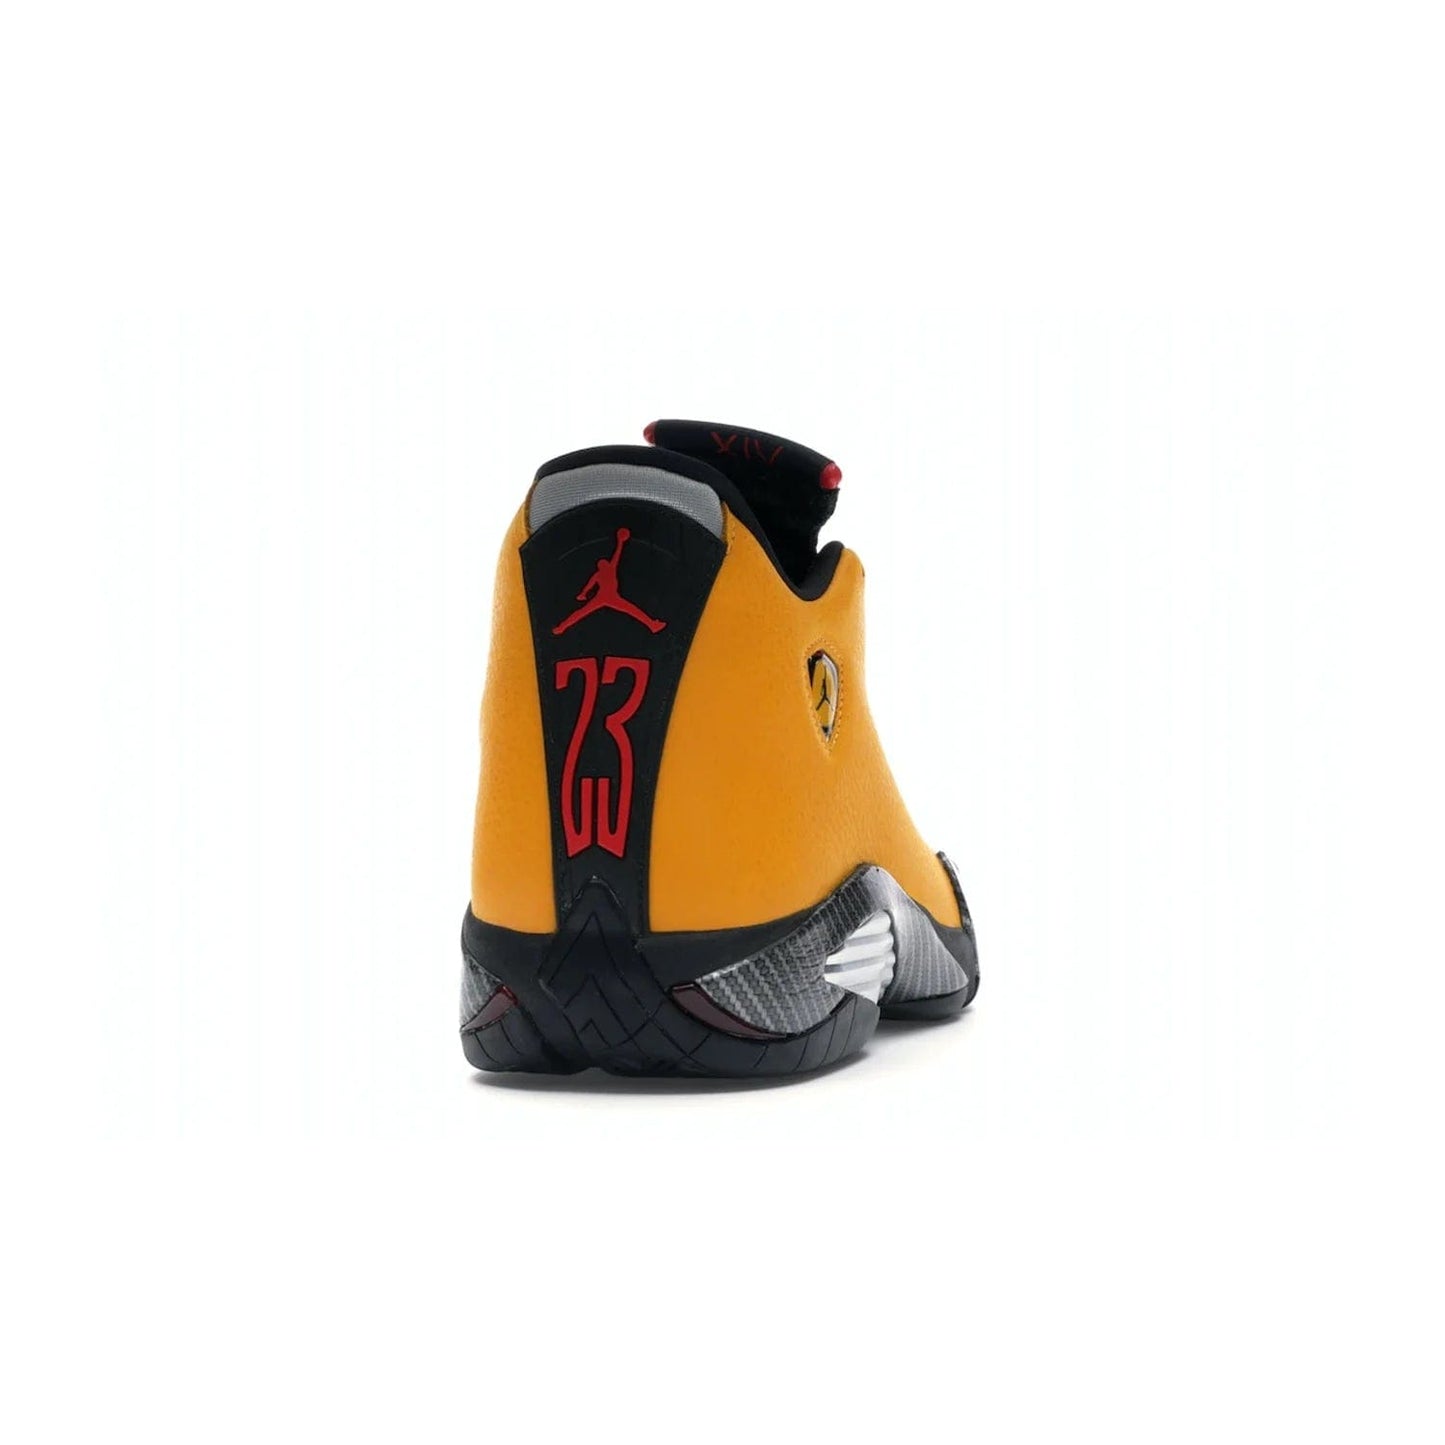 Jordan 14 Retro University Gold - Image 29 - Only at www.BallersClubKickz.com - Air Jordan 14 Retro University Gold: High-quality leather sneaker with Jumpman, tongue & heel logos. Zoom Air units & herringbone traction for superior comfort. University Gold outsole for stylish streetwear.